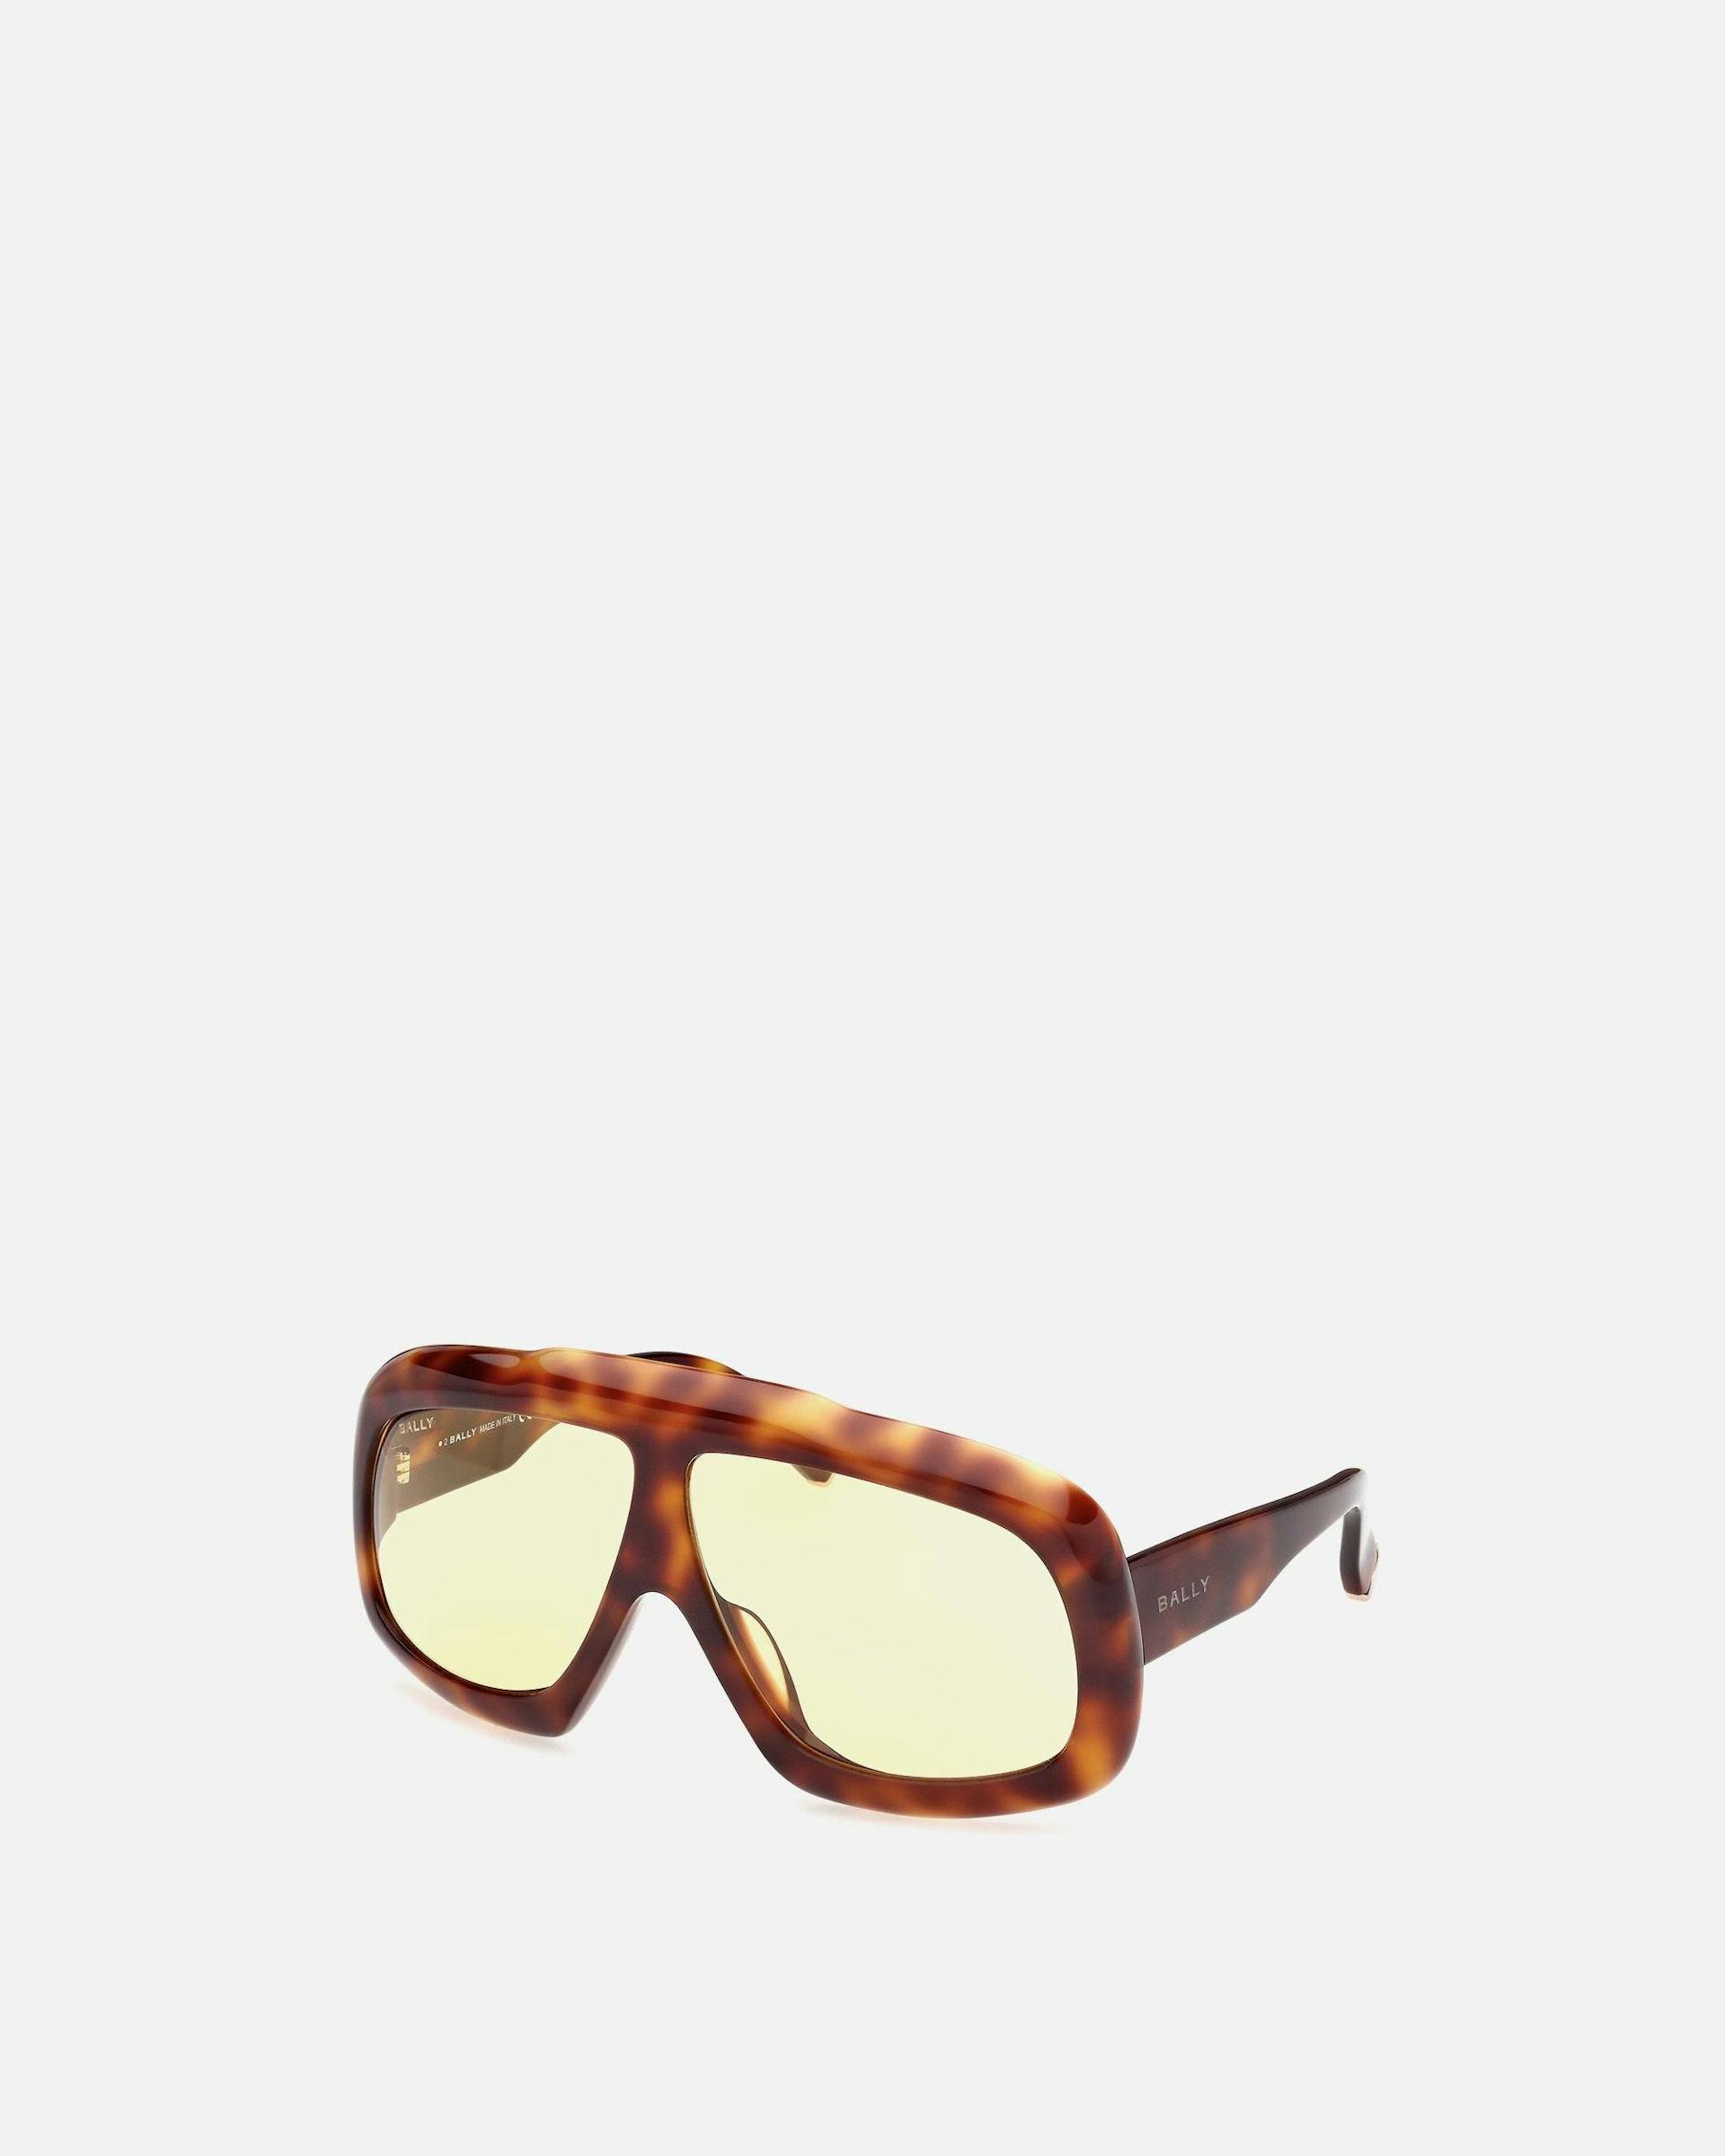 Eyger Acetate Sunglasses in Havana and Yellow | Bally | Still Life 3/4 Side